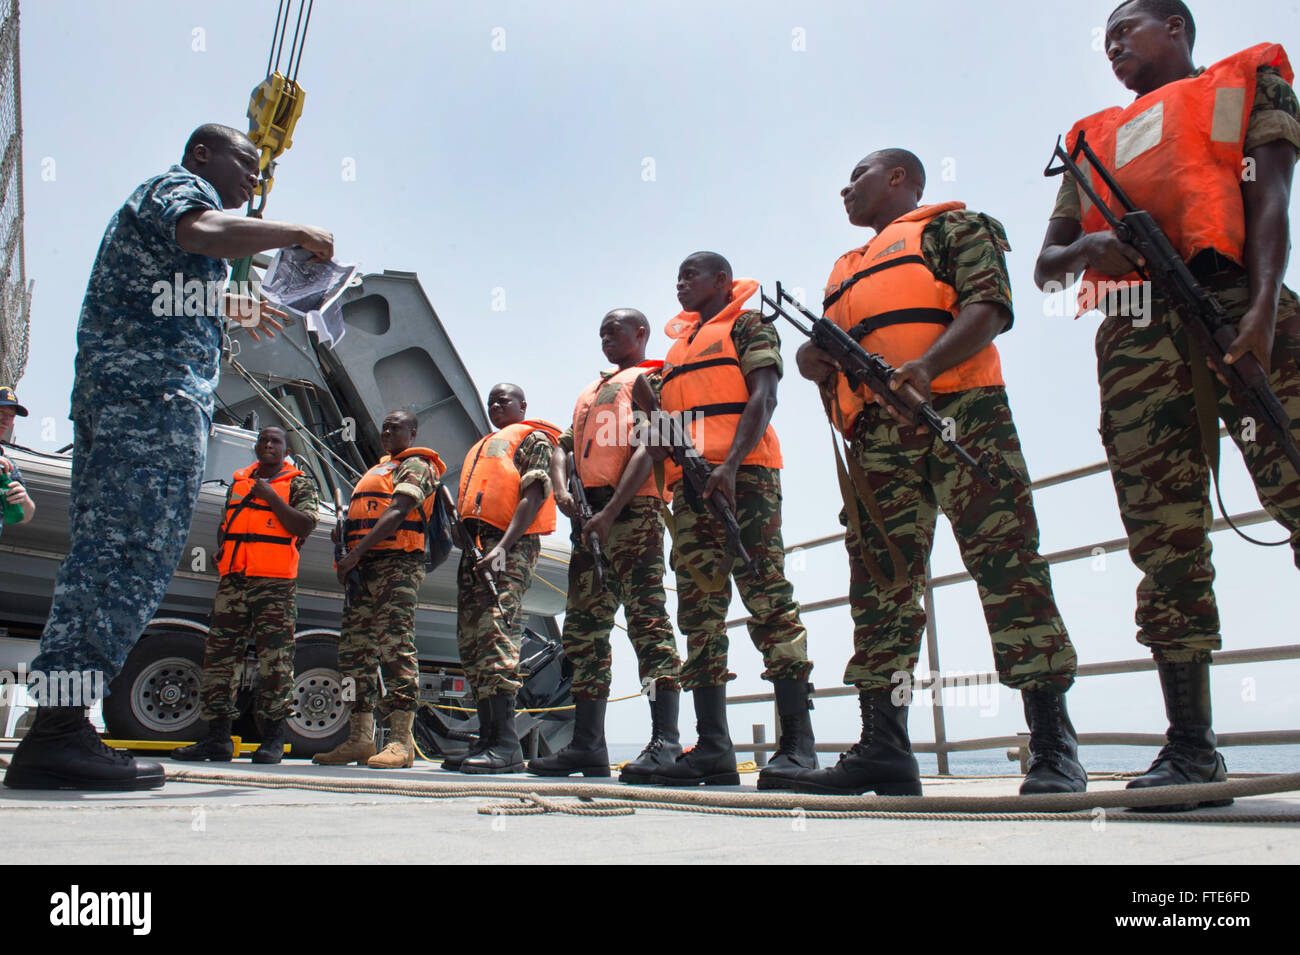 160322-N-QF605-050 GULF OF GUINEA (March 22, 2016) Aviation Boatswain's Mate (Equipment) 2nd Class Koffi Atanley, translates directions to Cameroon sailors aboard USNS Spearhead (T-EPF 1) during a boarding exercise for exercise Obangame/Saharan Express 2016, March 22. Obangame/Saharan Express, one of three African regional express series exercises facilitated by U.S. Naval Forces Europe-Africa/U.S. 6th Fleet, seeks to increase regional cooperation, maritime domain awareness, information sharing practices and improve interoperability among participating forces in order to enhance maritime secur Stock Photo